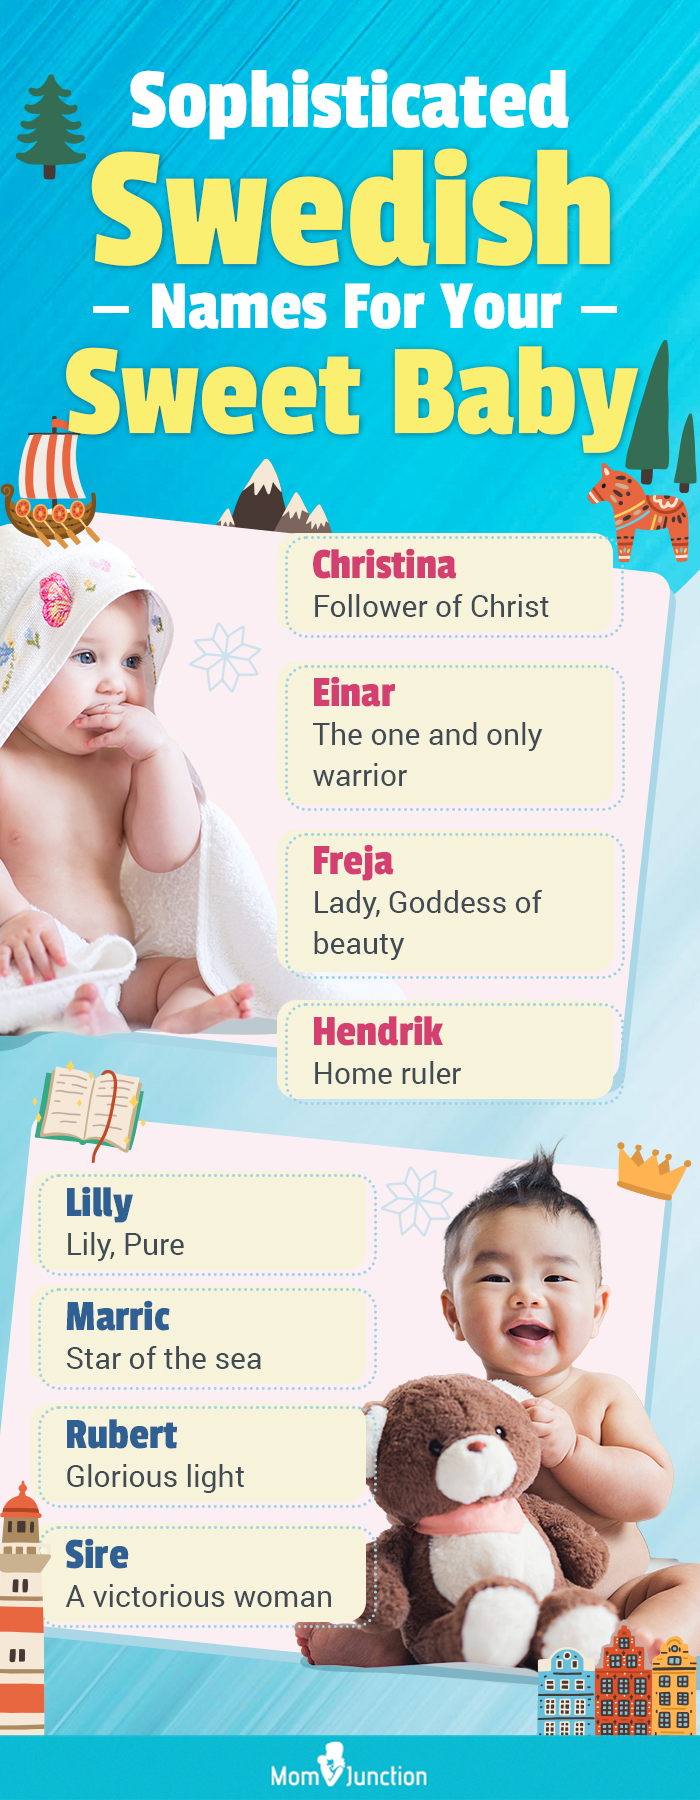 sophisticated swedish names for your sweet baby (infographic)